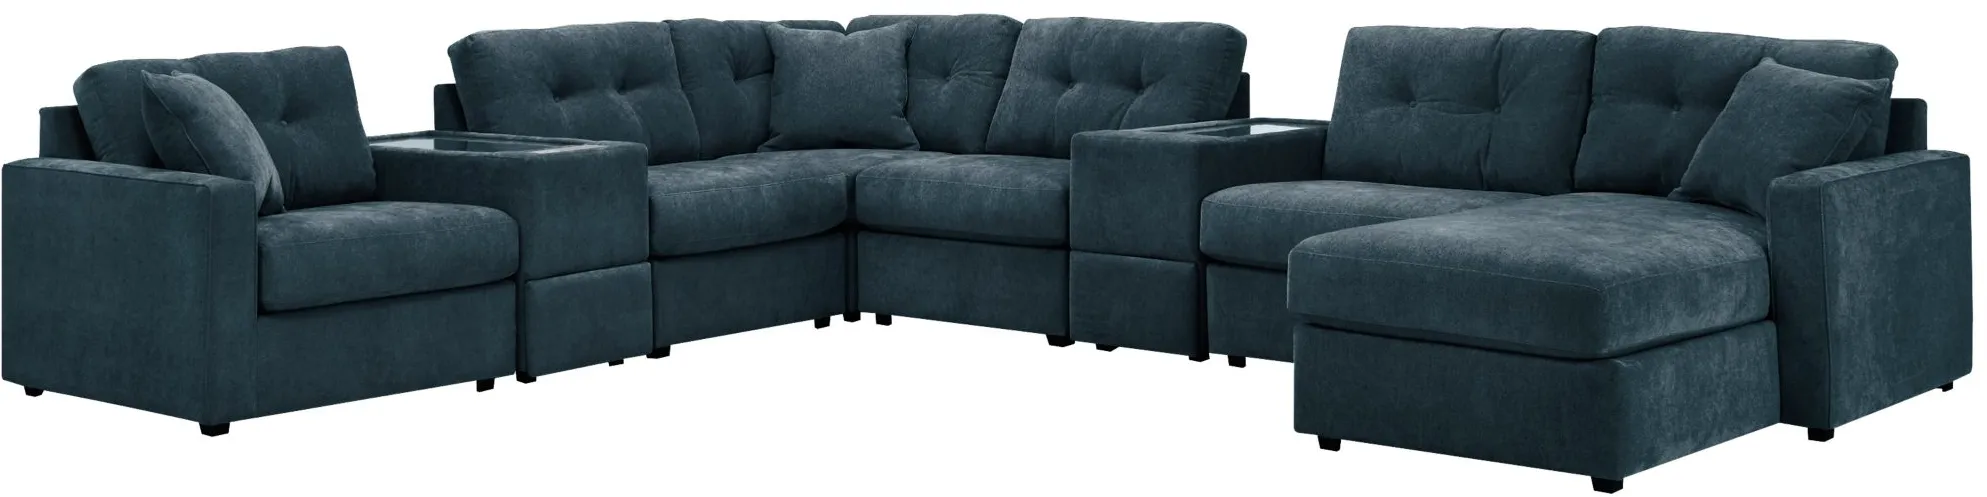 ModularOne 8-pc Sectional w/One Power Console in Navy by H.M. Richards